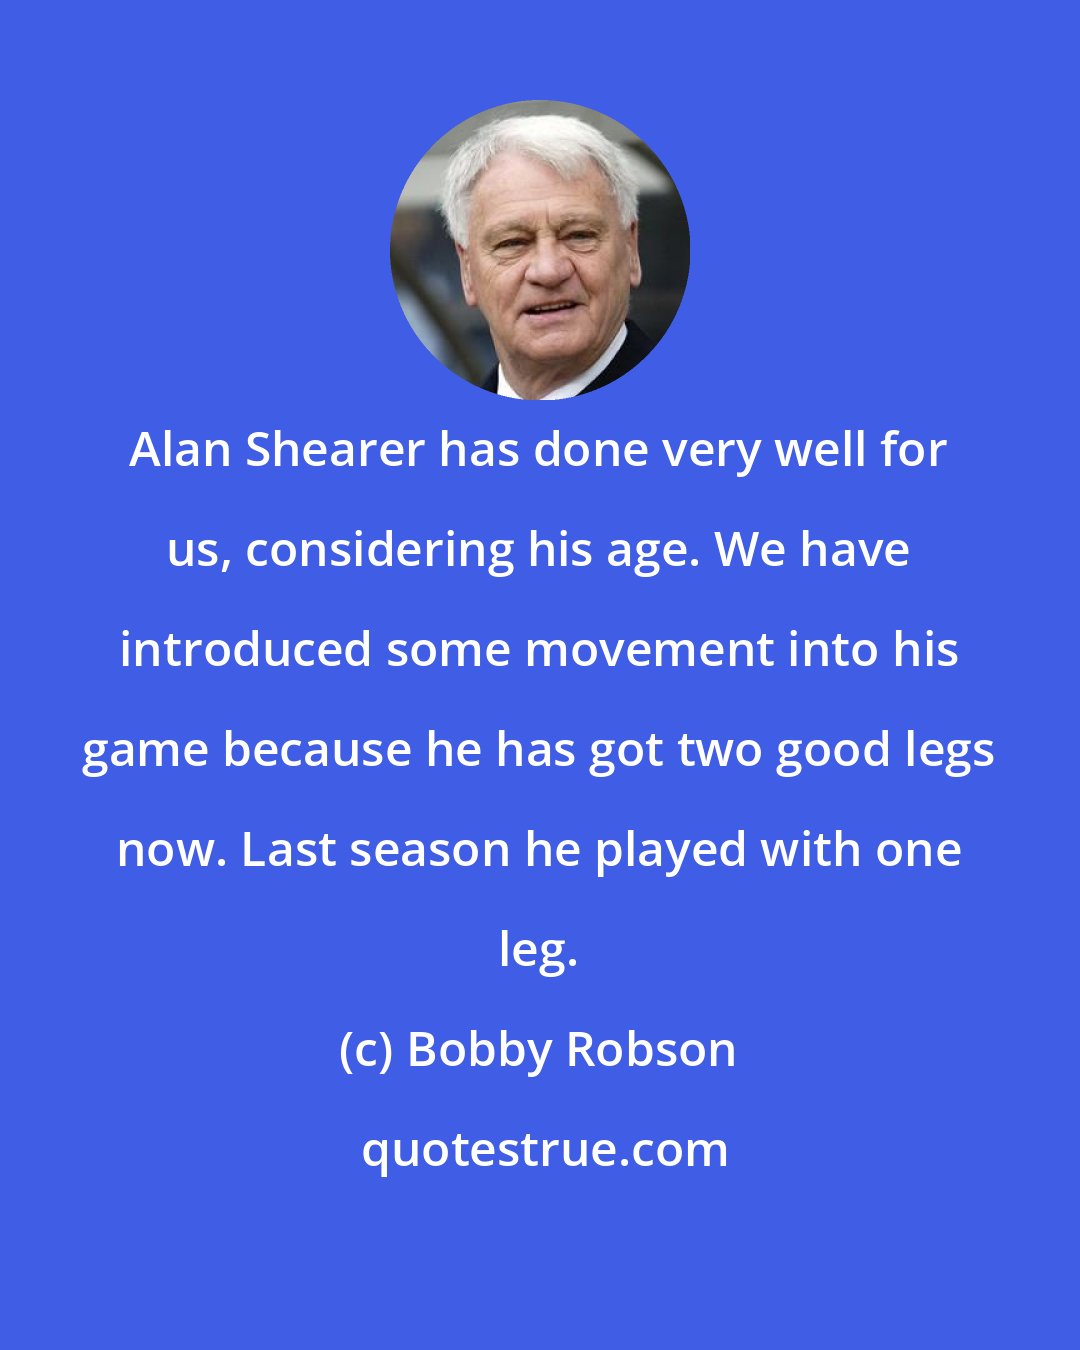 Bobby Robson: Alan Shearer has done very well for us, considering his age. We have introduced some movement into his game because he has got two good legs now. Last season he played with one leg.